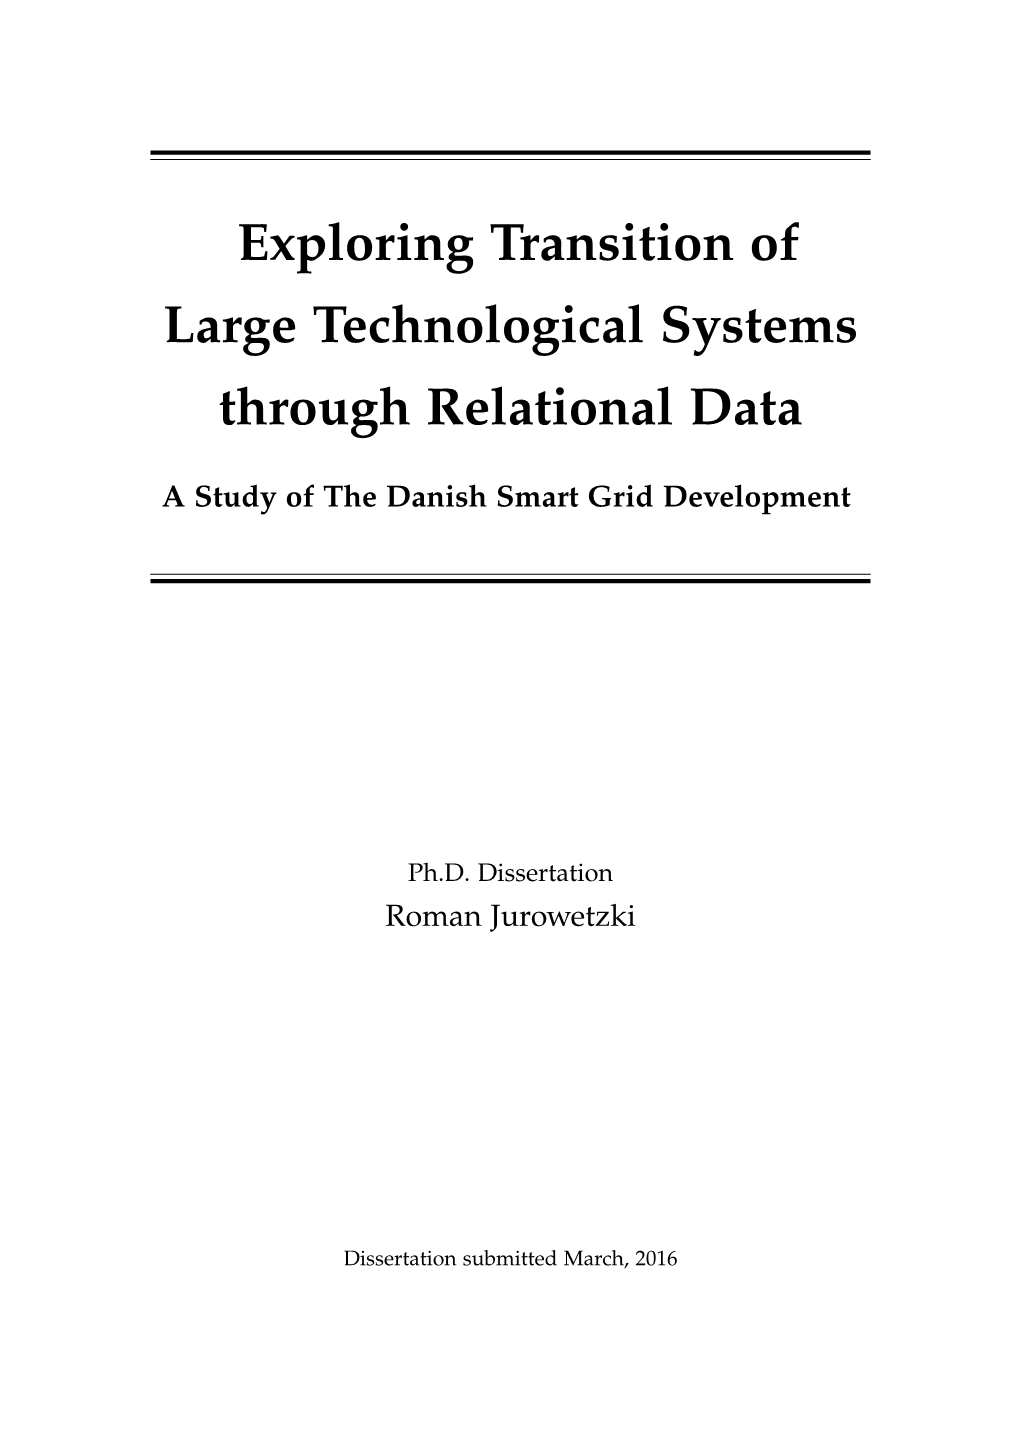 Exploring Transition of Large Technological Systems Through Relational Data